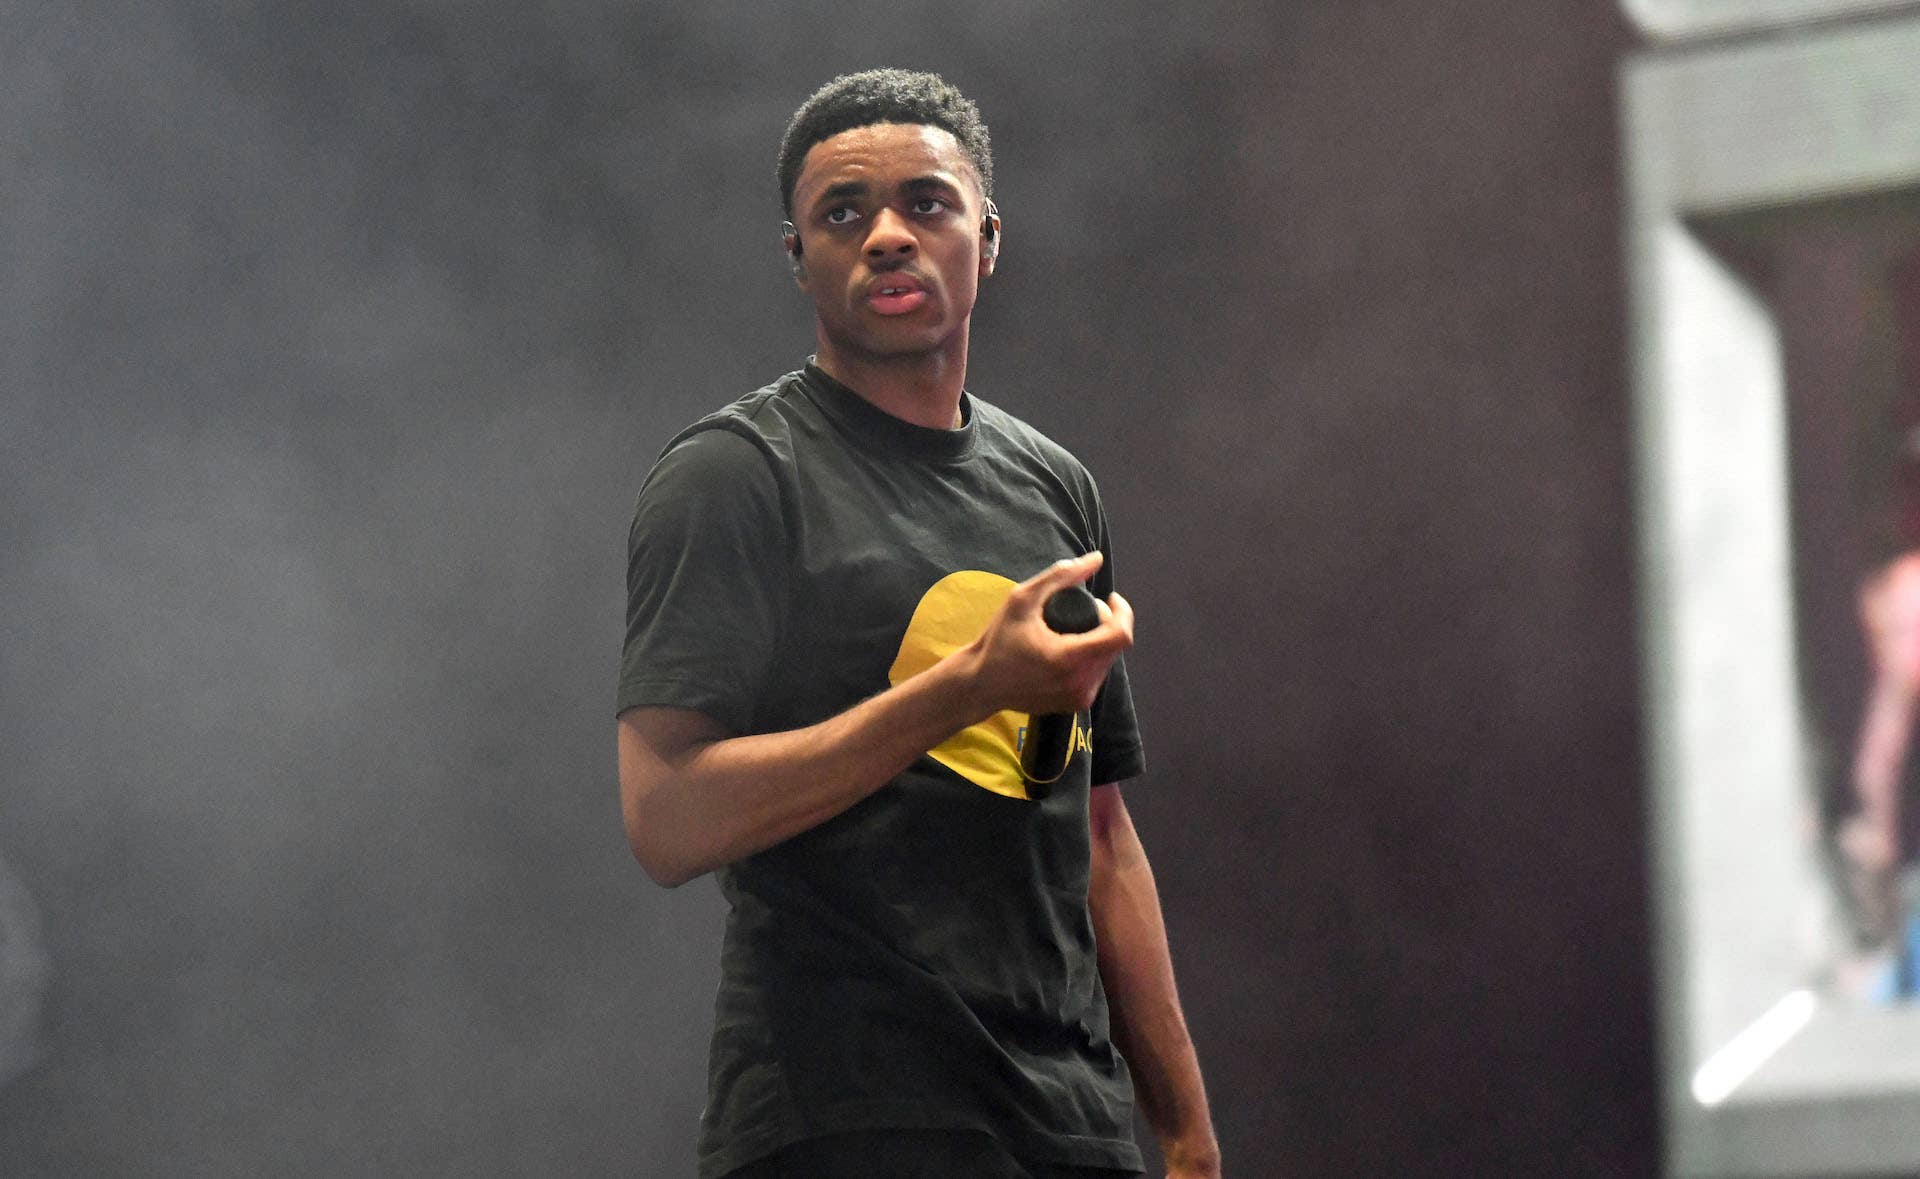 Vince Staples performing at 2019 Adult Swim Fest